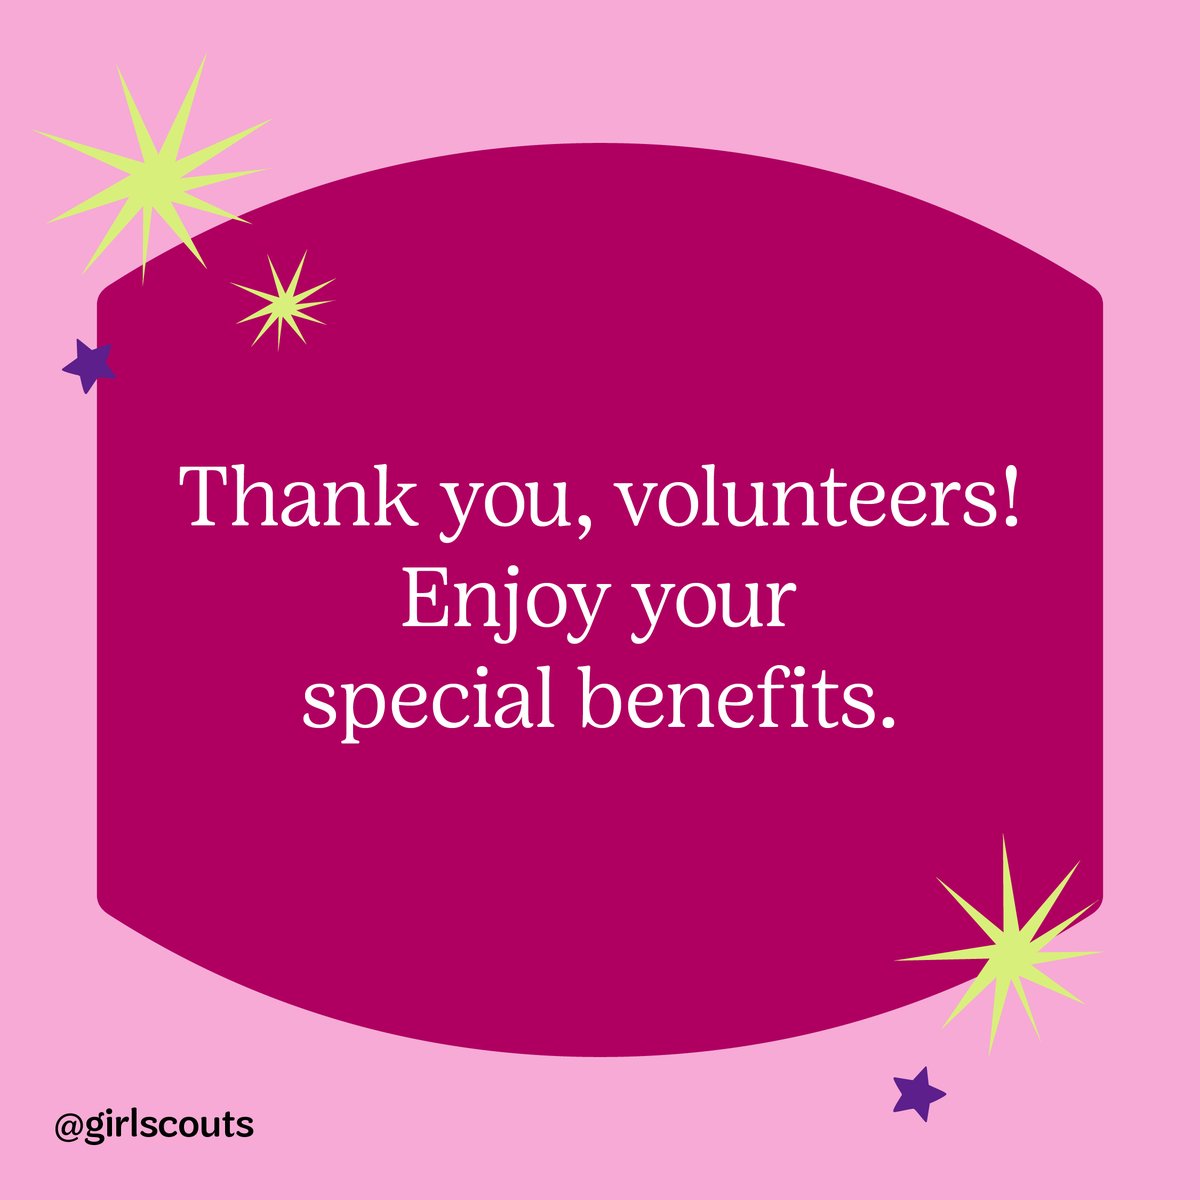 Calling all volunteers! 🔊 As a token of our appreciation, please enjoy 15% off $50+ with promo code THANKS24 in the Girl Scout Shop from 4/19–4/22. 💝 Be sure to enter our special Volunteer Sweeps for the chance to win up to $1,250 in retail value! ✨ link.girlscouts.org/4cIDFRa